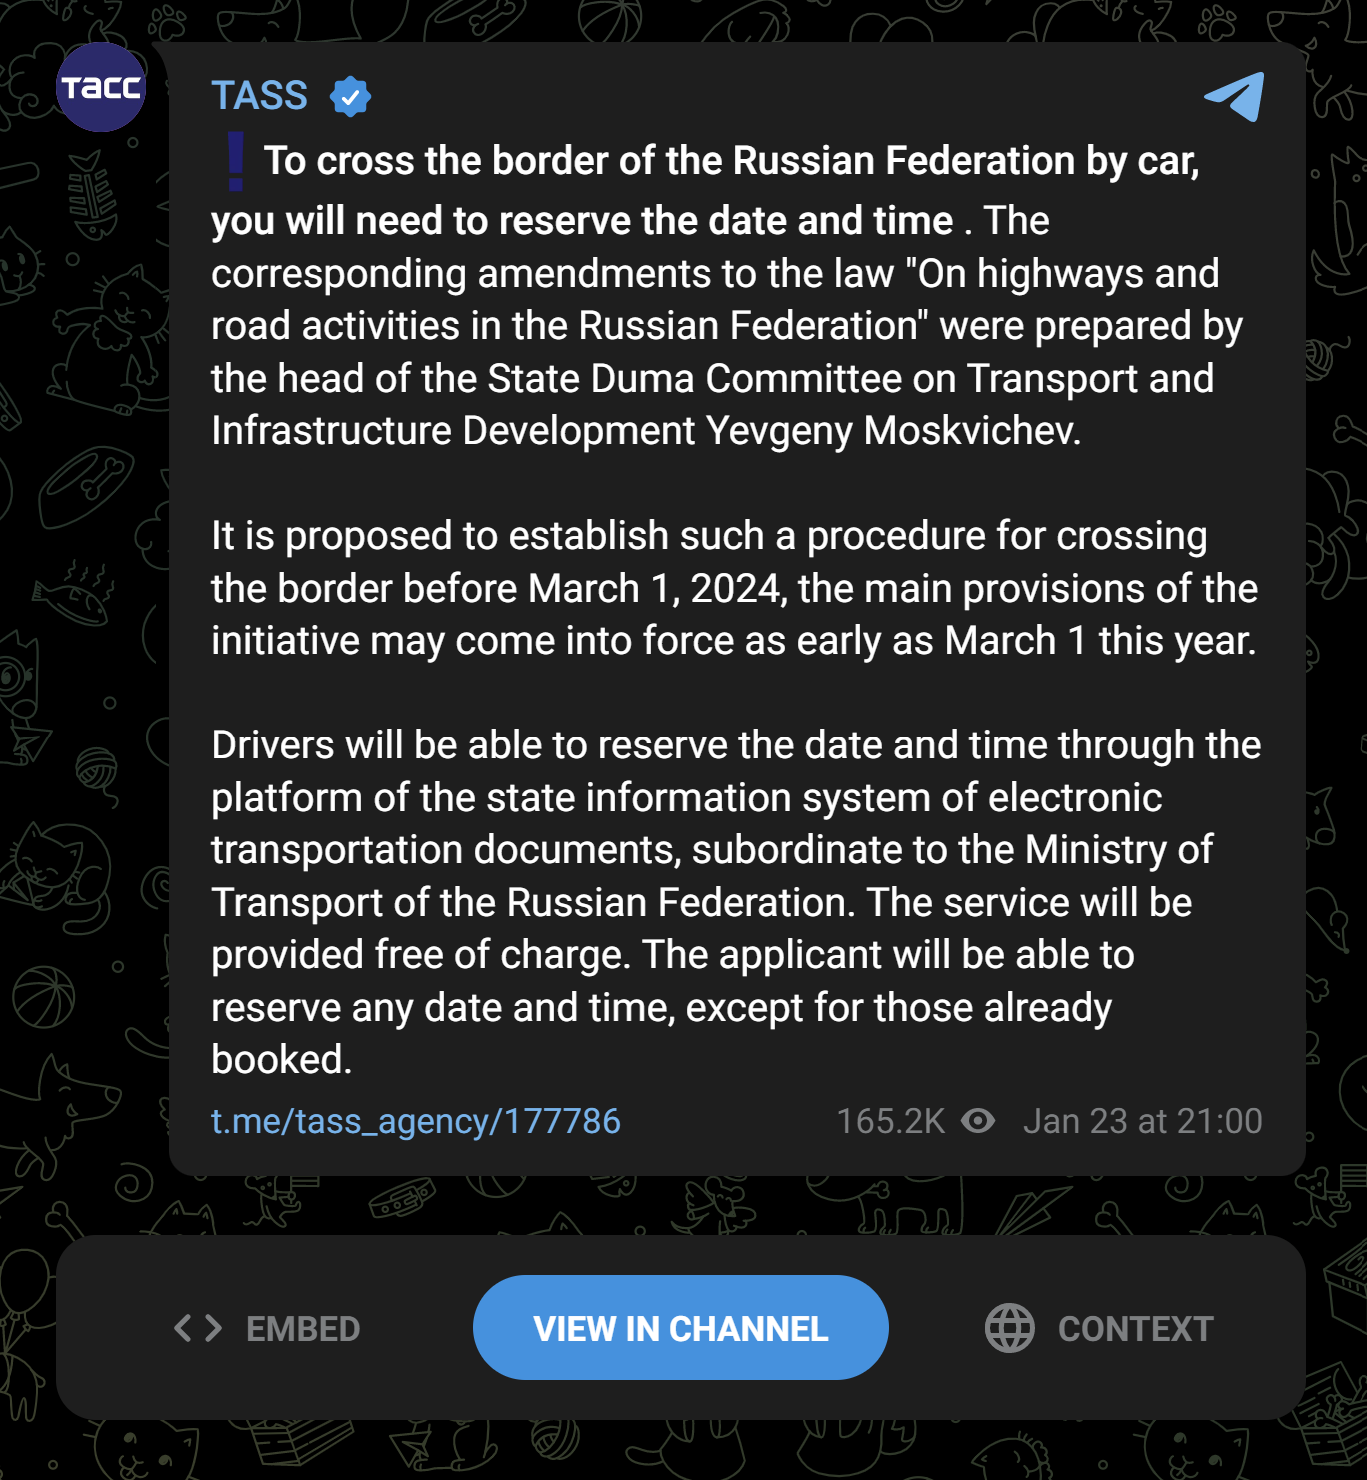 Screenshot of TASS report on their Telegram Channel covering the proposed border restrictions. Translated using Google. Source: https://t.me/tasss/177786